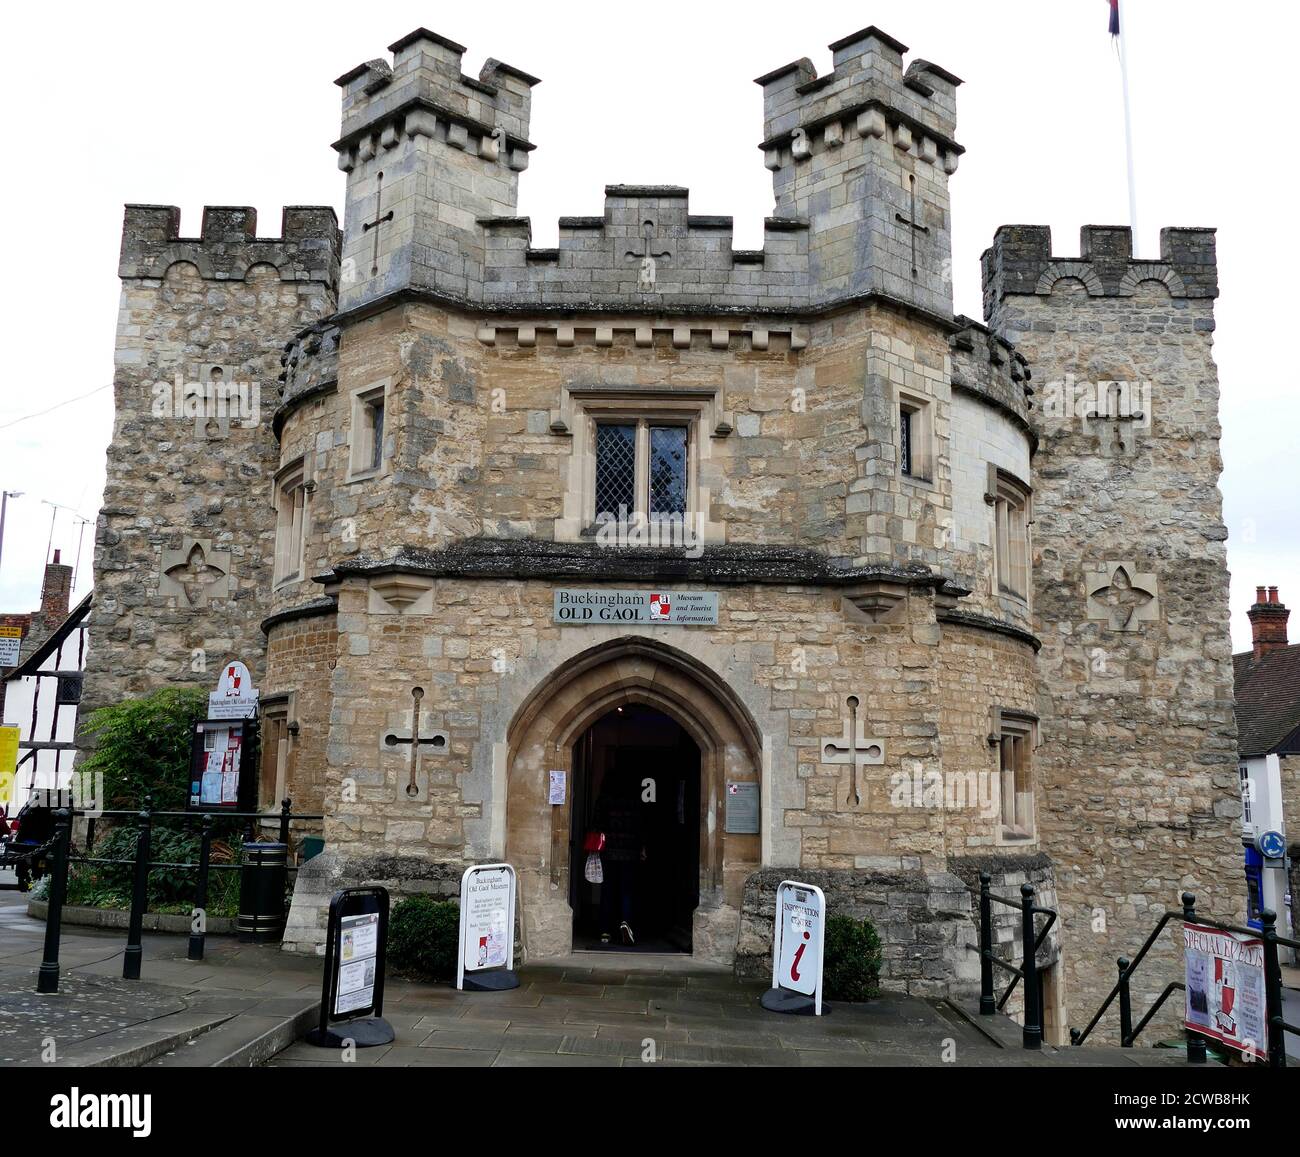 Buckingham Old Gaol, a historic building in Buckingham, England. now a museum, shop and tourist information centre, the original prison building was erected in 1748. It was built in the Gothic style. One of the prisoners jailed here was the prize fighter Simon Byrne. Stock Photo